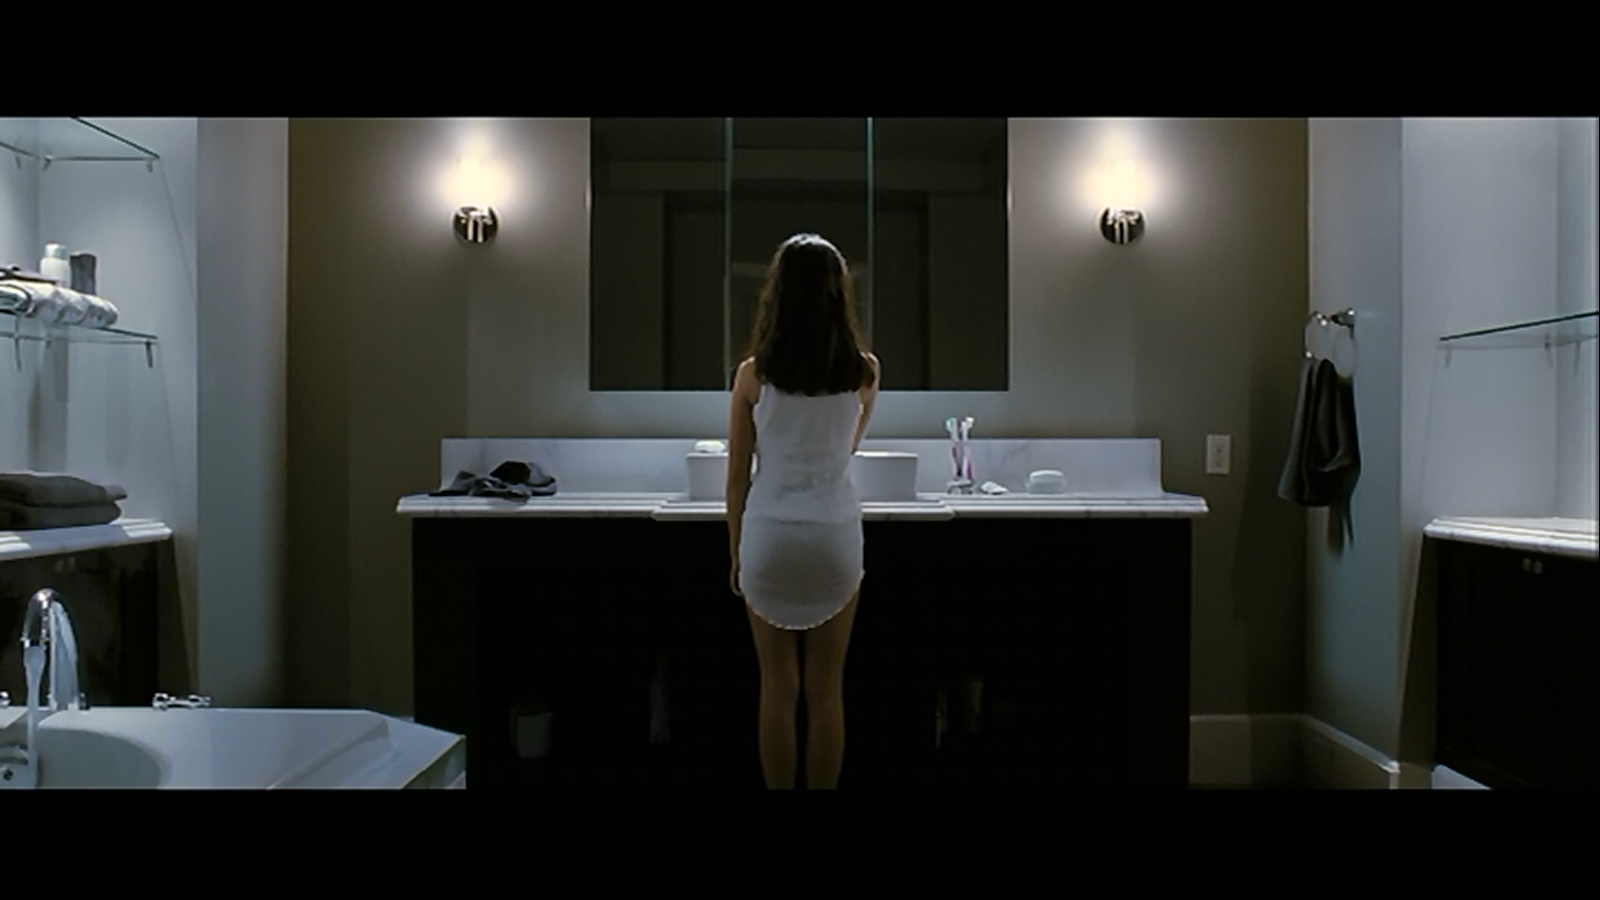 More rupophobia and bathrooms in recent horror: the examples of The Possess...